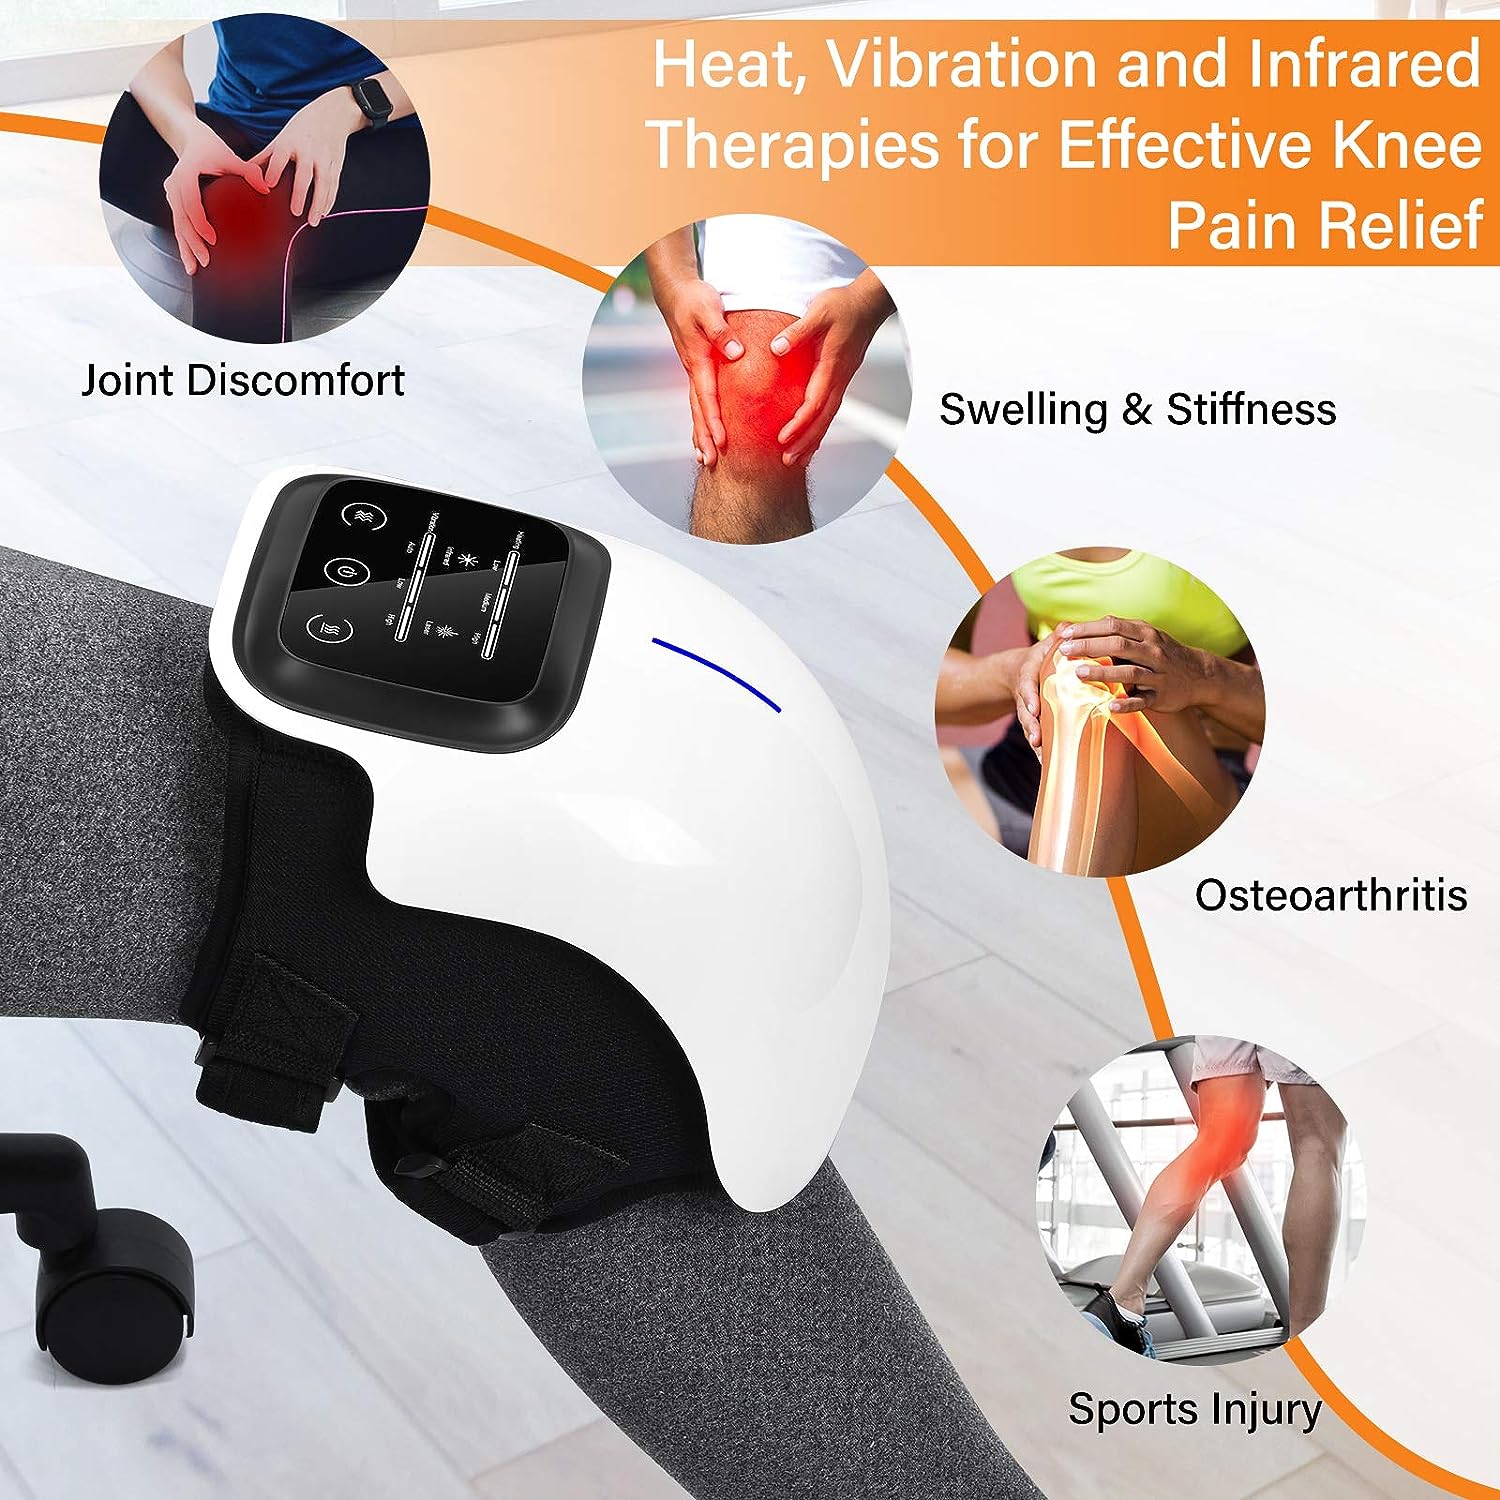 FORTHiQ Cordless Knee Massager, Powerful Infrared Heat and Vibration Knee Pain Relief for Swelling Stiff Joints, Stretched Ligament and Muscles Injuries, July 2022 Upgrade with Longer Knee Straps